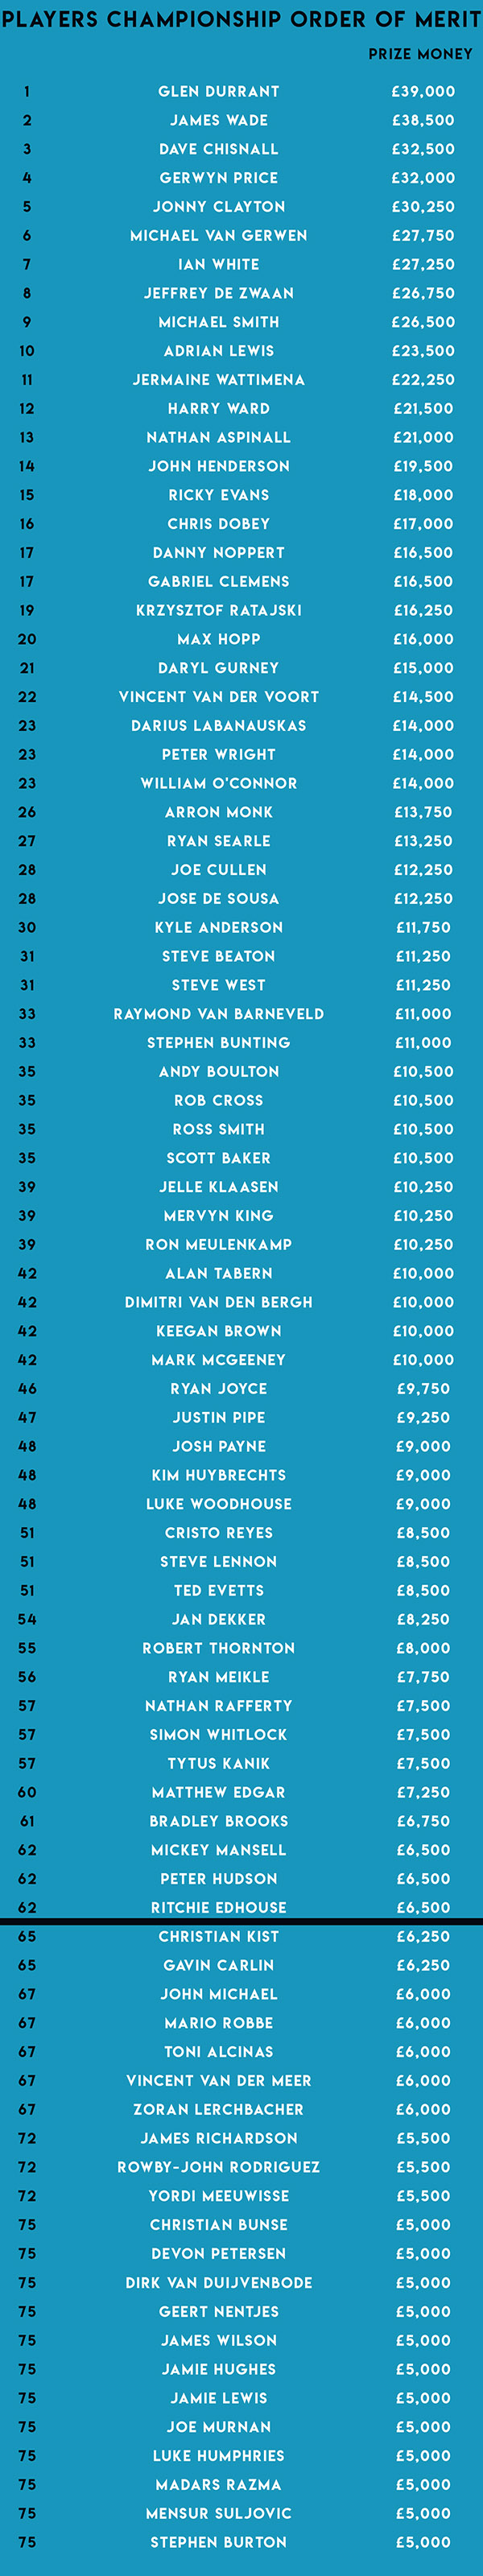 Players Championship Order of Merit (PDC)